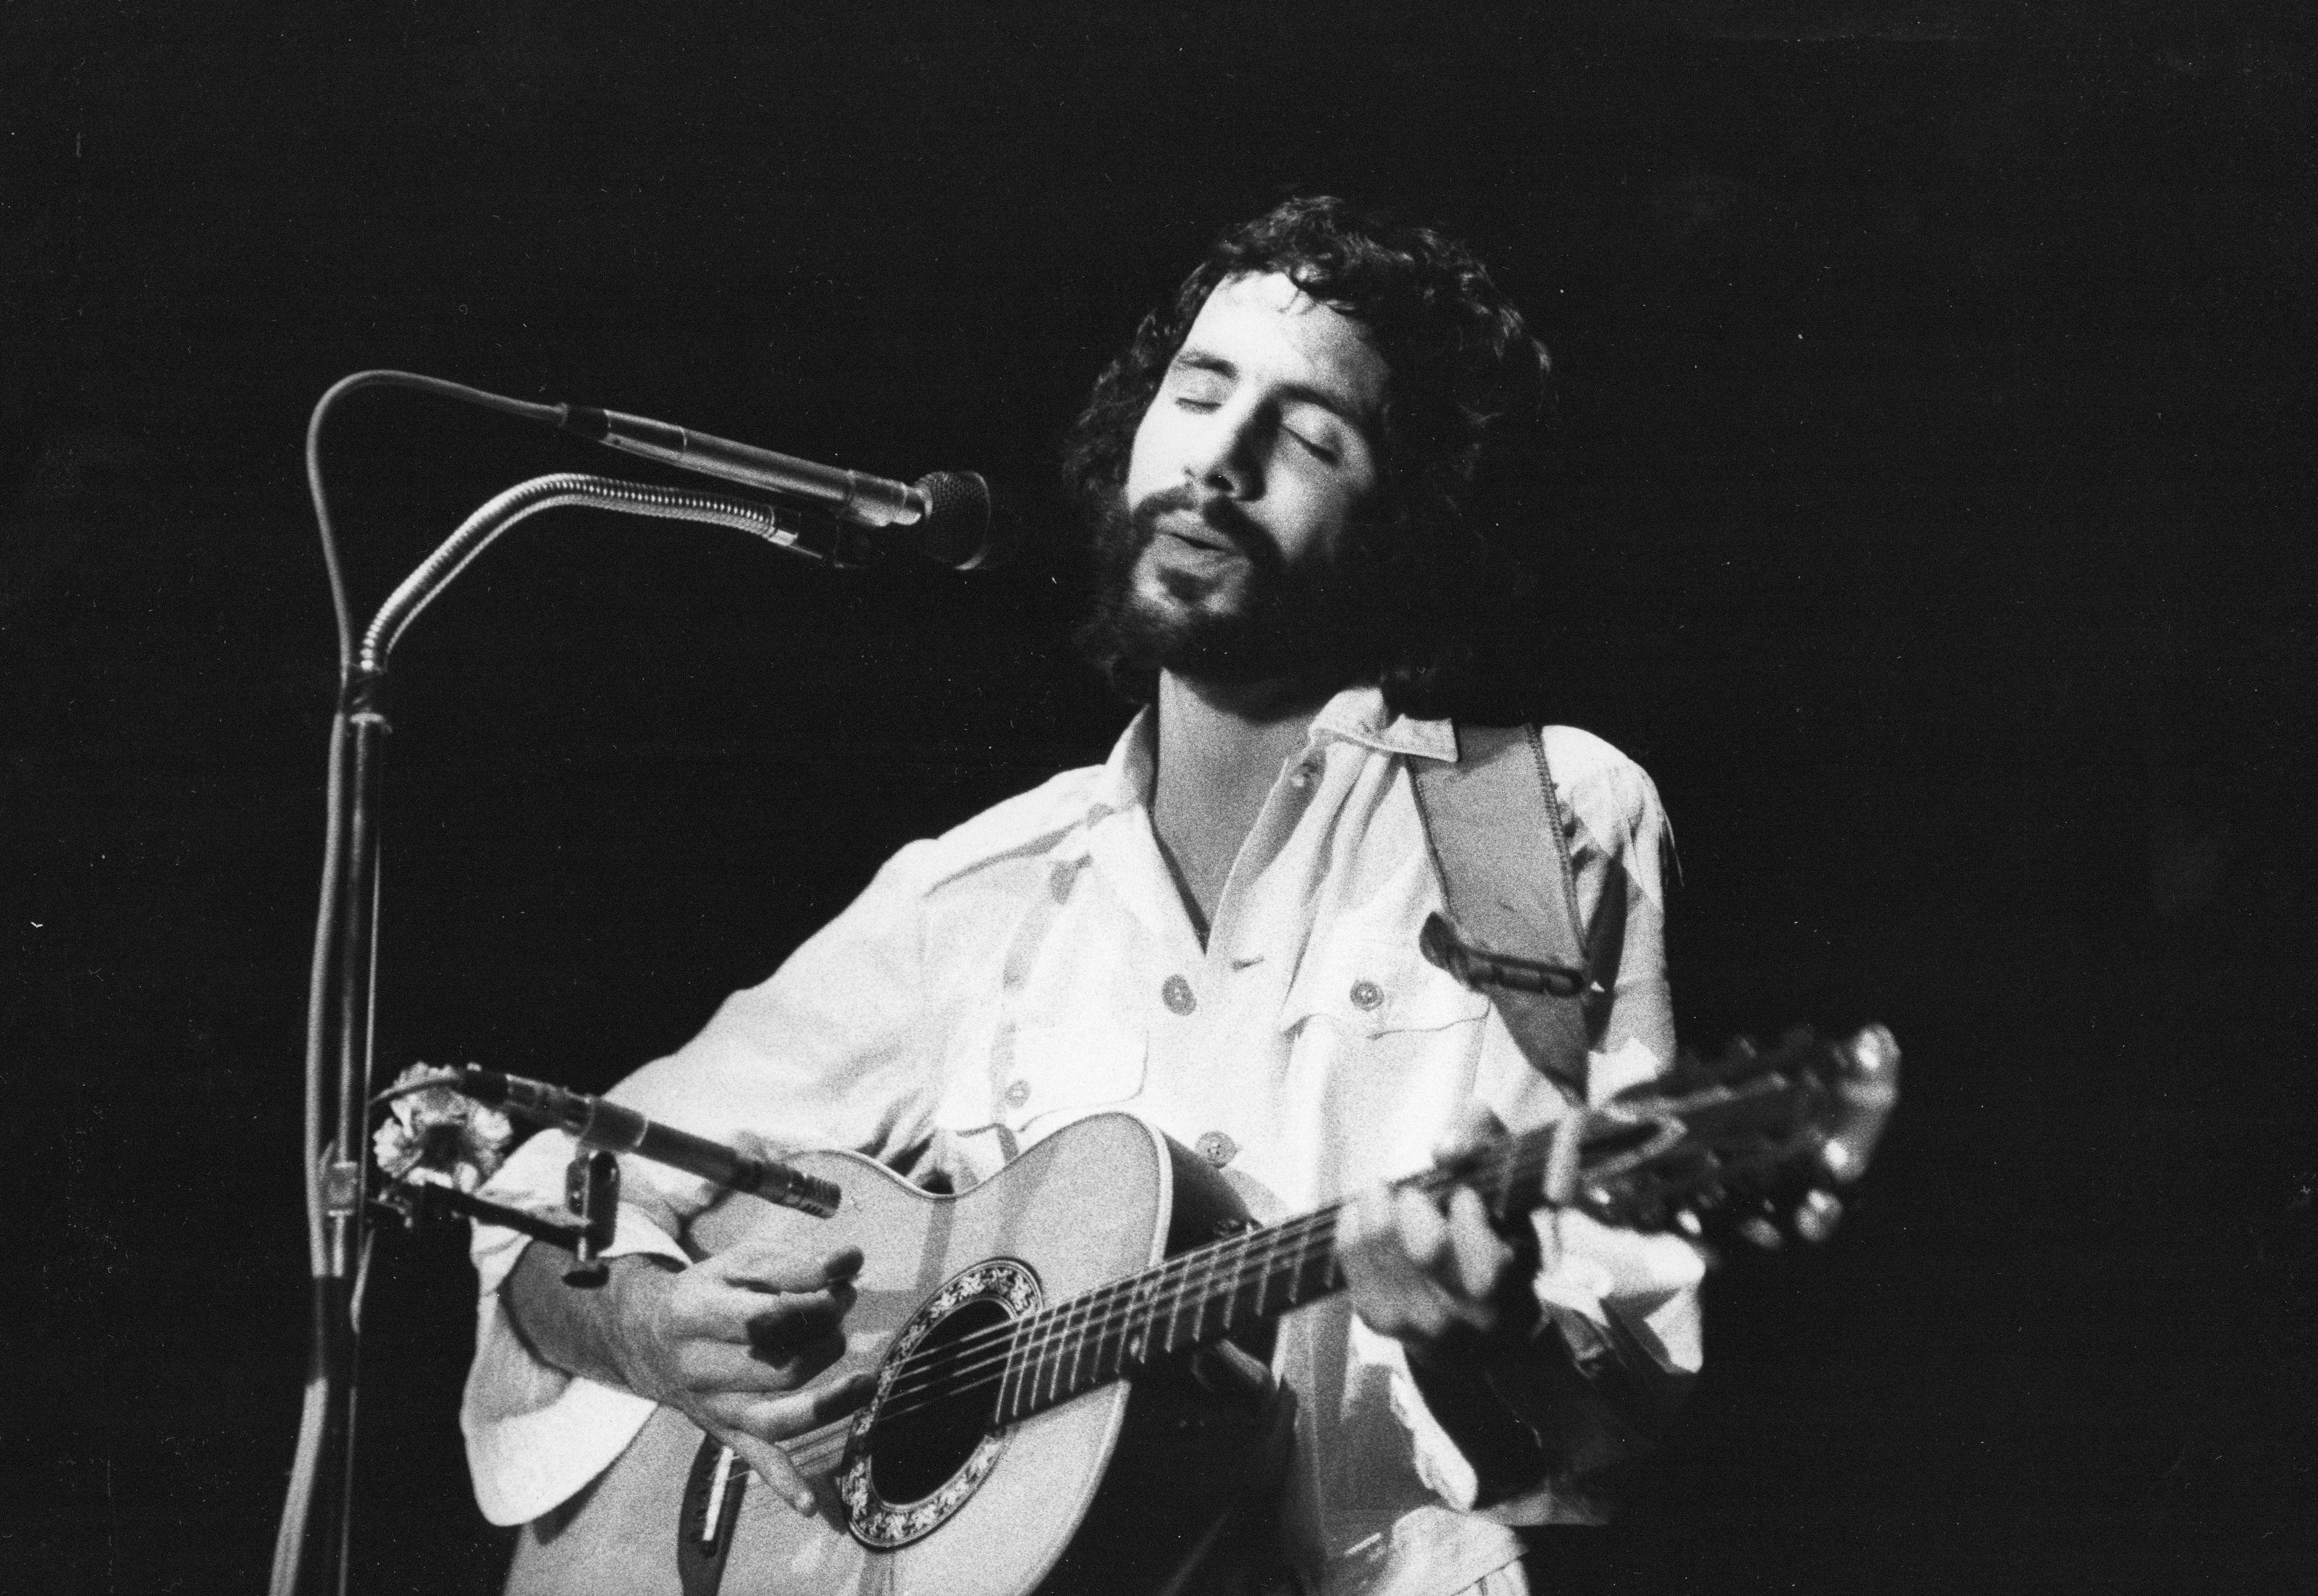 Paul Canty Black and White Photograph - Cat Stevens Performing and Playing Guitar Vintage Original Photograph